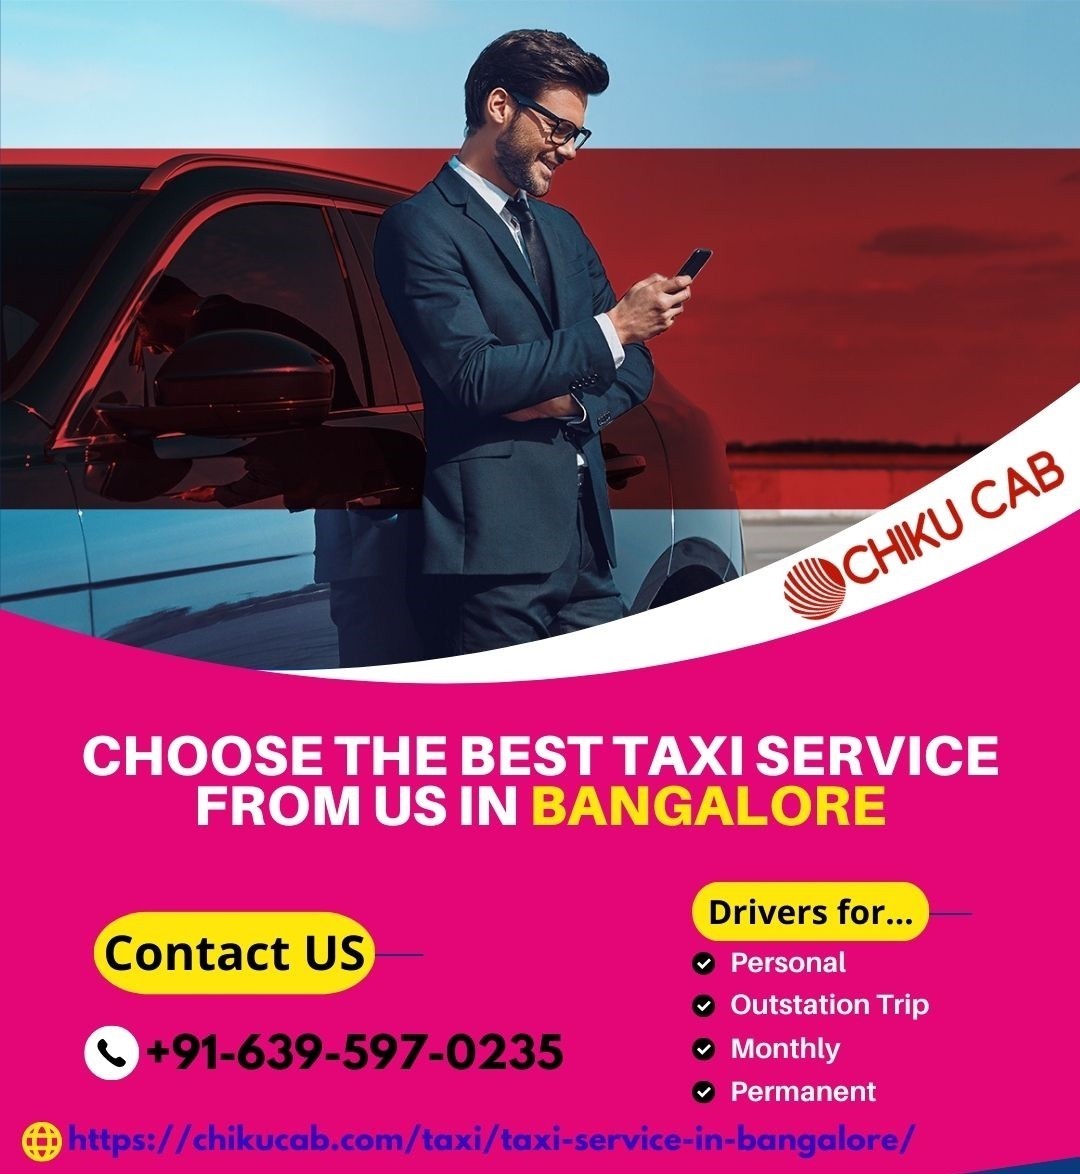 Choose the Best Taxi Service from Us in Bangalore